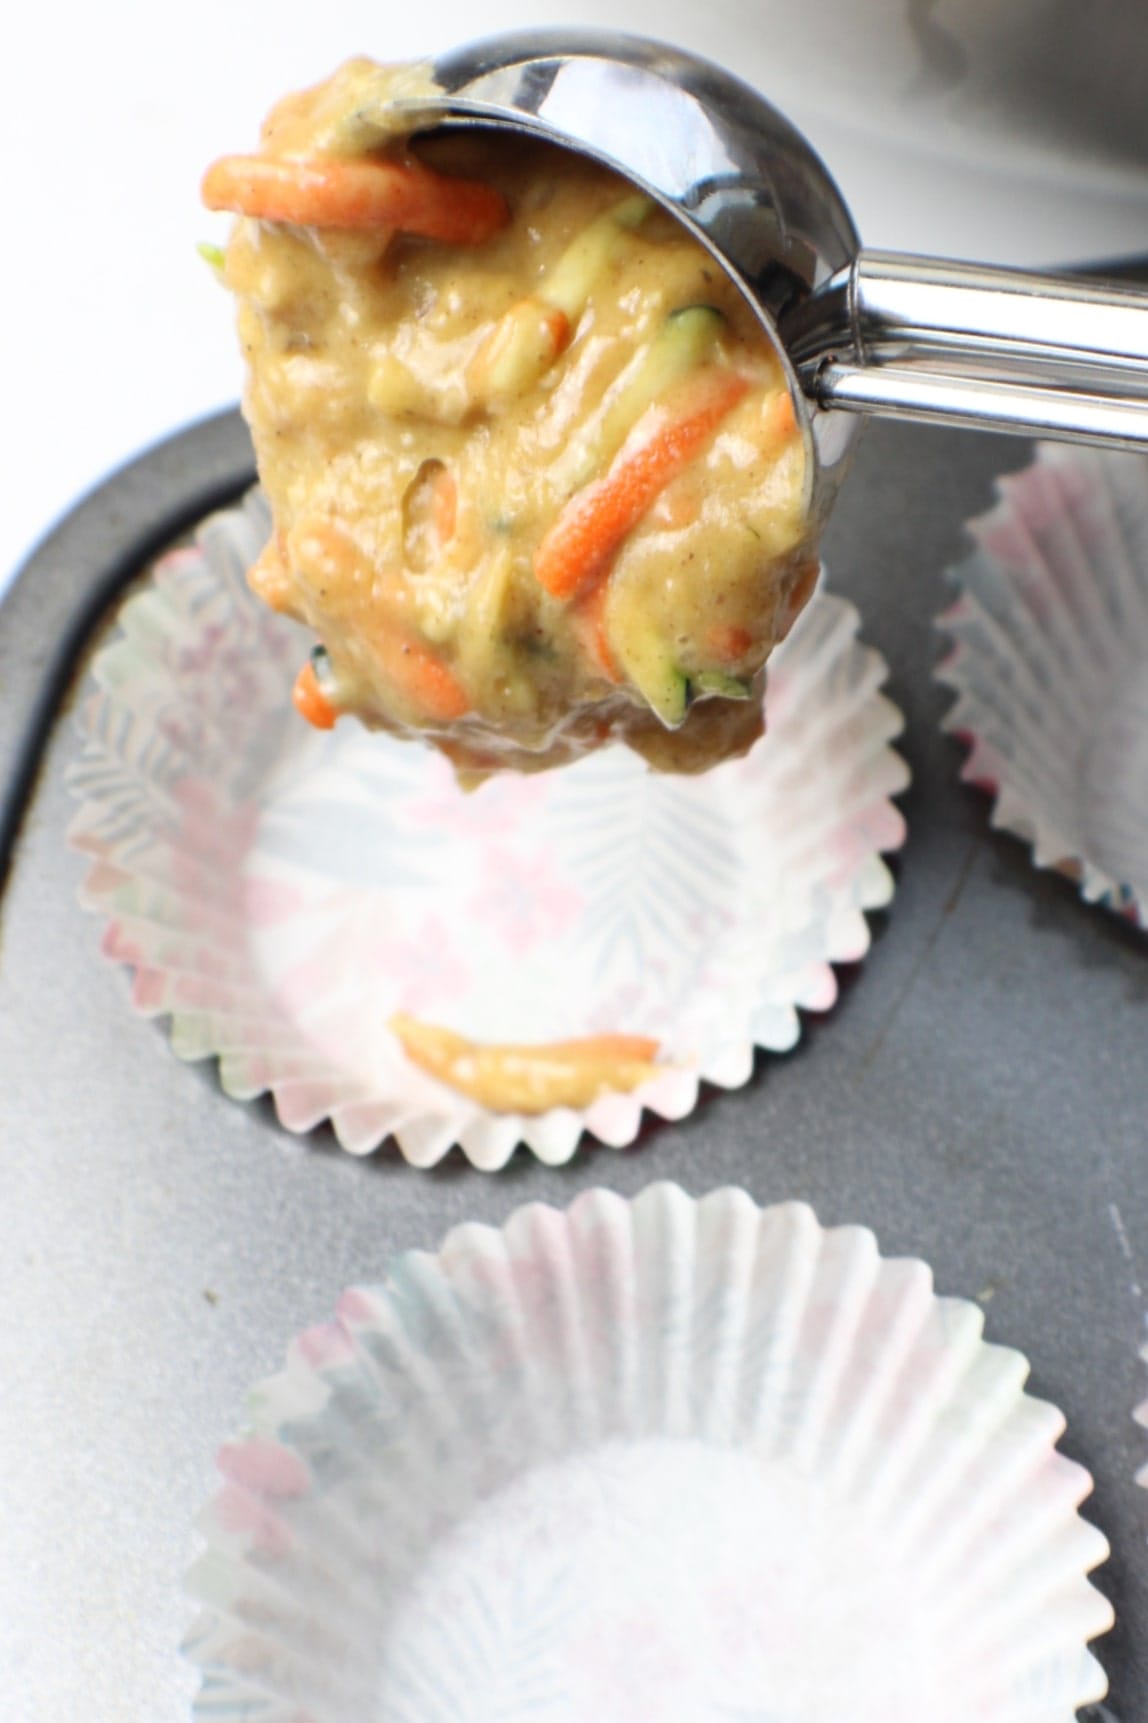 Morning Glory Muffins batter scooped into muffin tin